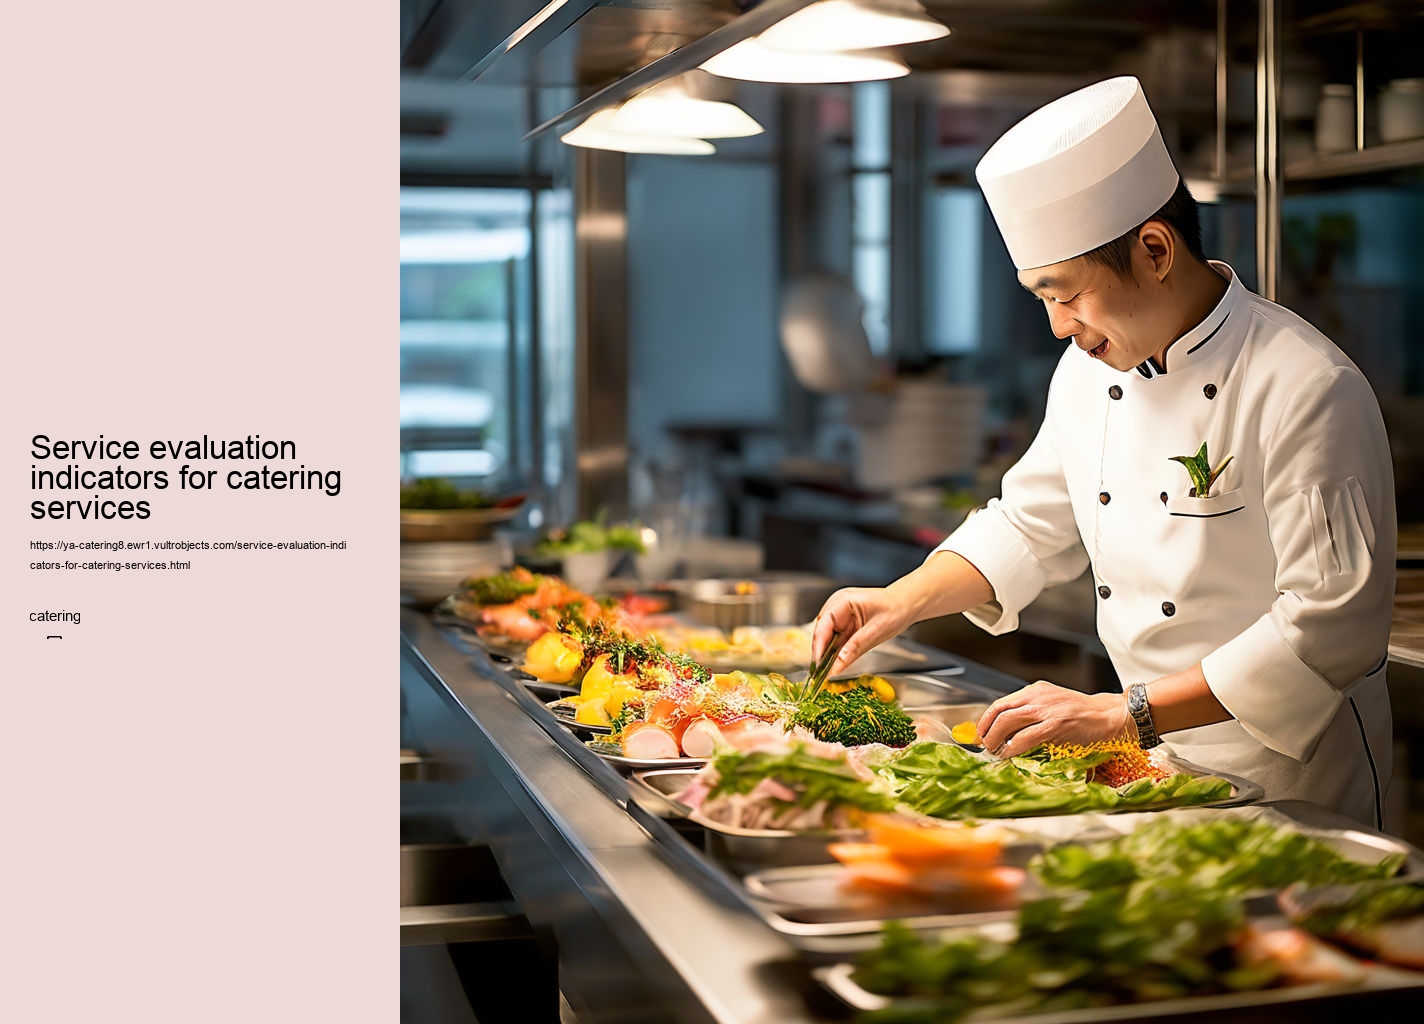 Service evaluation indicators for catering services